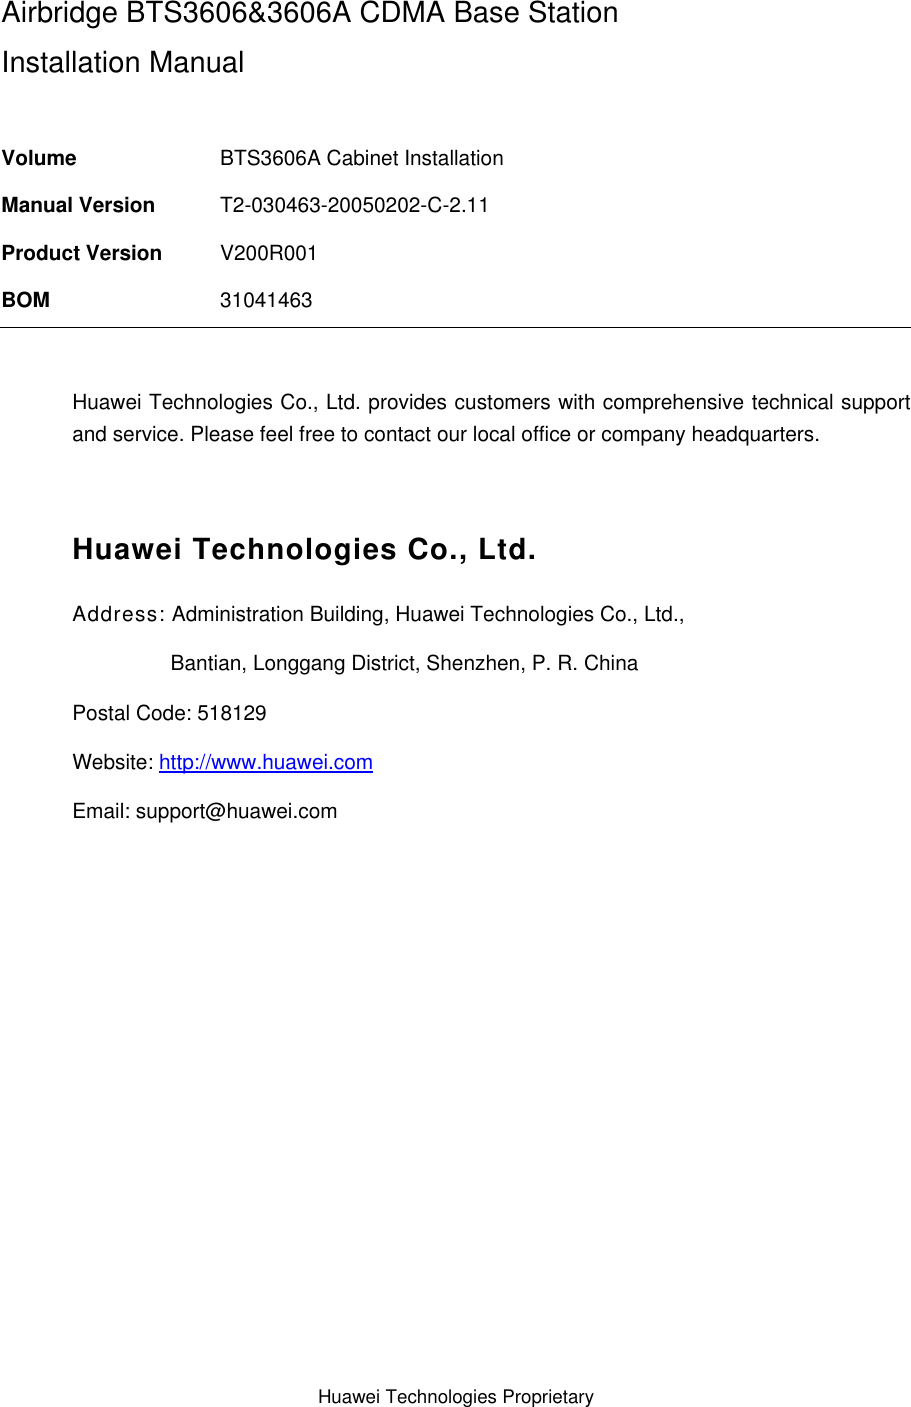 Huawei Technologies Proprietary  Airbridge BTS3606&amp;3606A CDMA Base Station Installation Manual  Volume  BTS3606A Cabinet Installation Manual Version  T2-030463-20050202-C-2.11 Product Version  V200R001 BOM  31041463  Huawei Technologies Co., Ltd. provides customers with comprehensive technical support and service. Please feel free to contact our local office or company headquarters.  Huawei Technologies Co., Ltd. Address: Administration Building, Huawei Technologies Co., Ltd.,                  Bantian, Longgang District, Shenzhen, P. R. China Postal Code: 518129 Website: http://www.huawei.com Email: support@huawei.com  